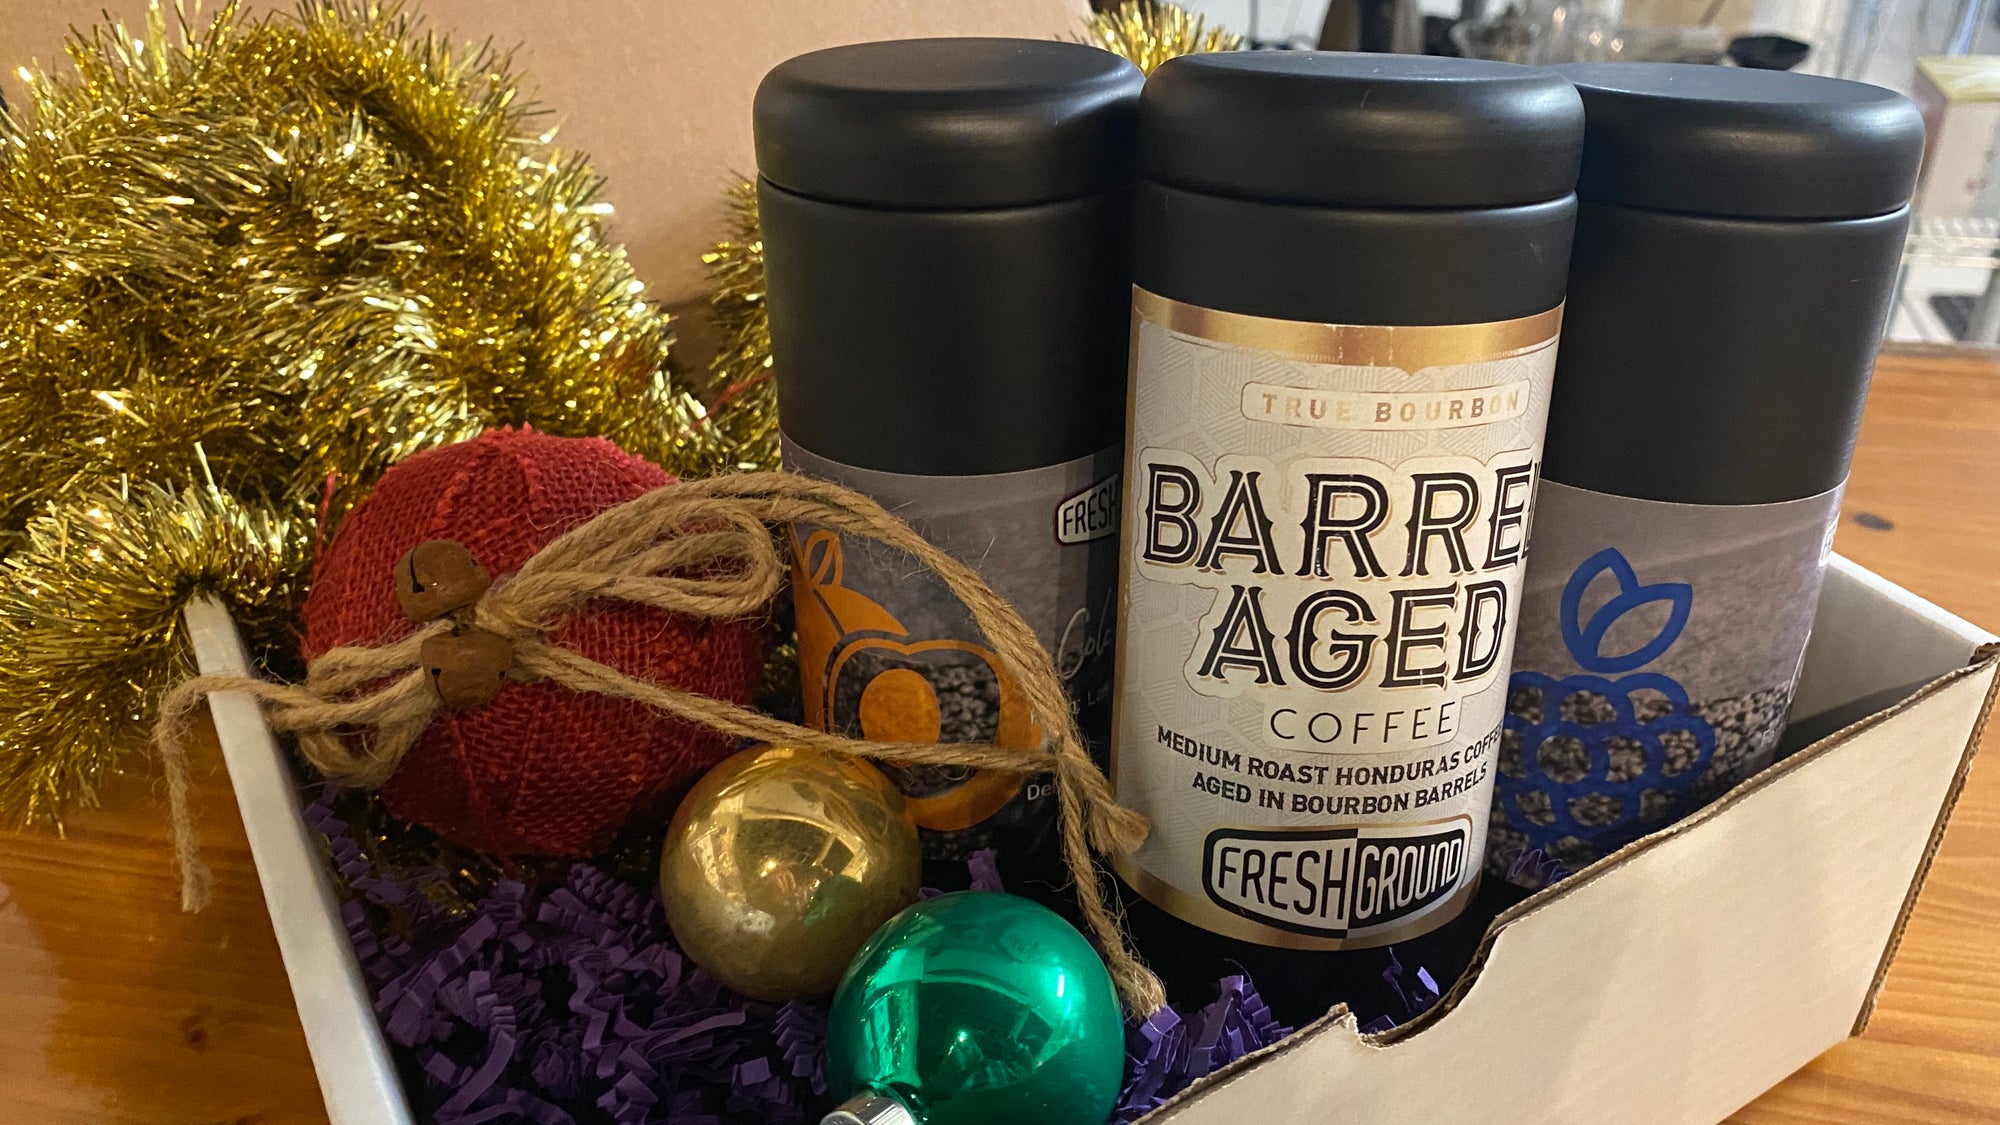 Barrel Aged Coffee and Infused Gift Box